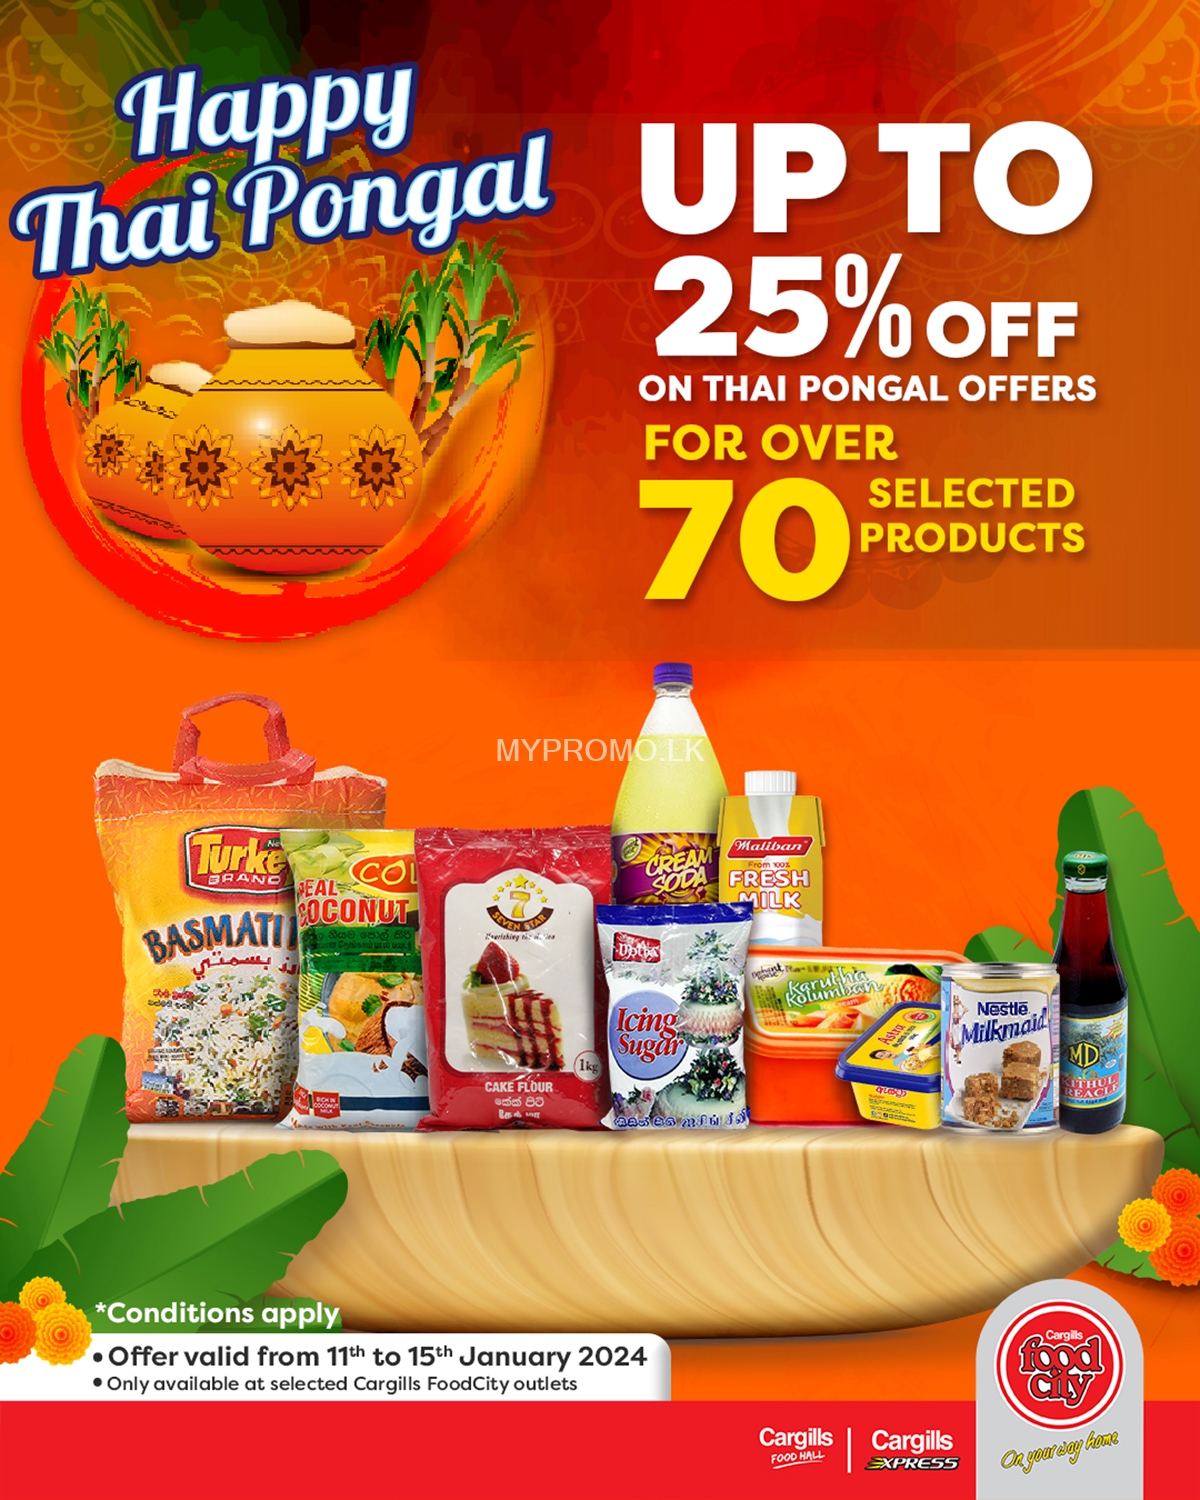 Enjoy up to 25% off on Thai Pongal offers for over 70 selected products at Cargills Food City